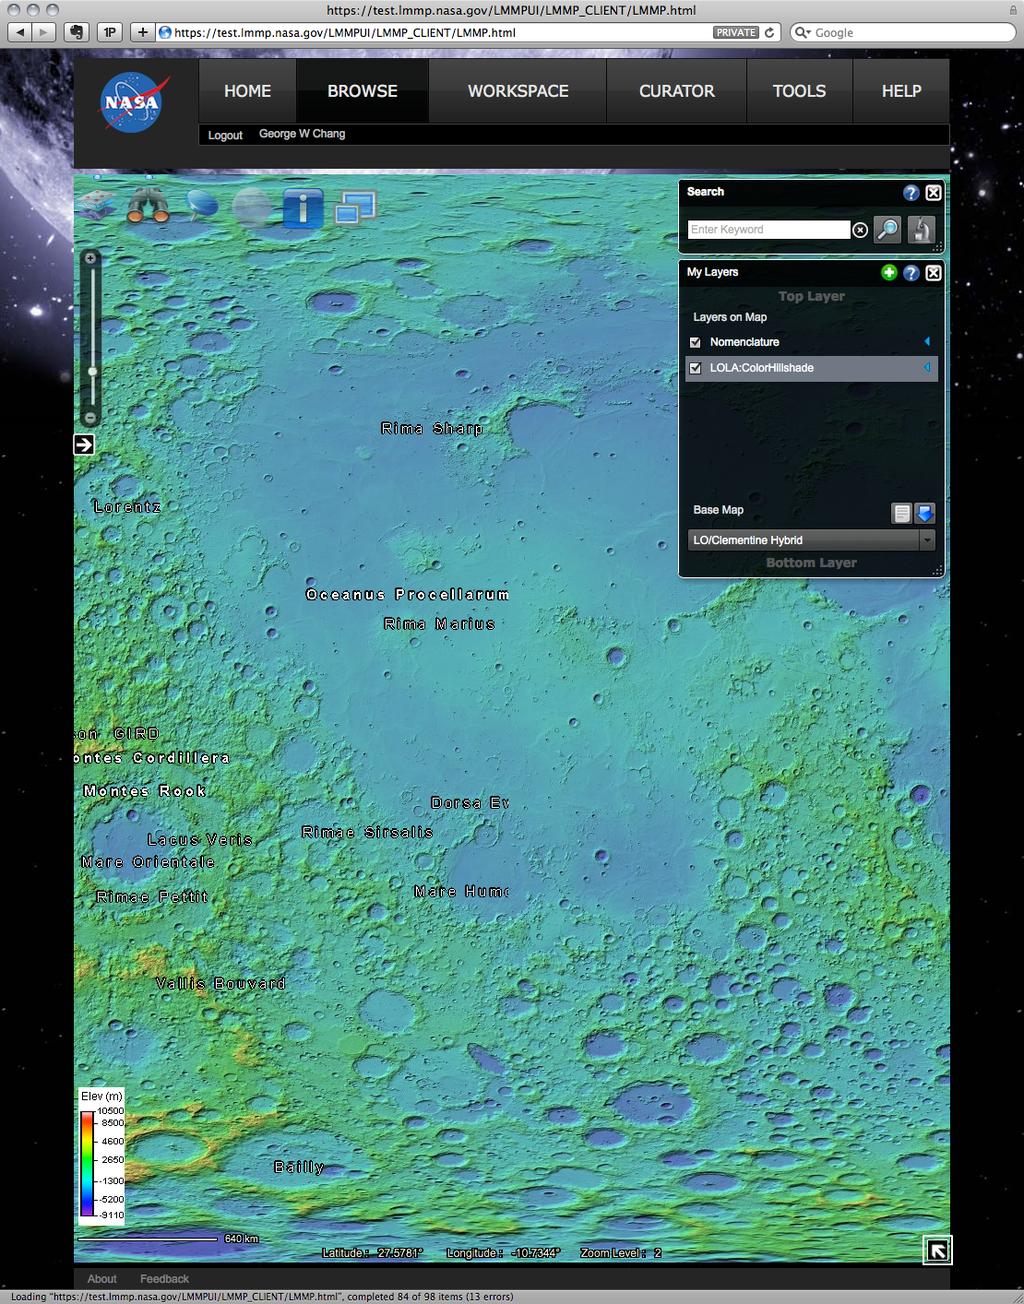 1/26/12 Lunar Modeling and Mapping Project (LMMP)